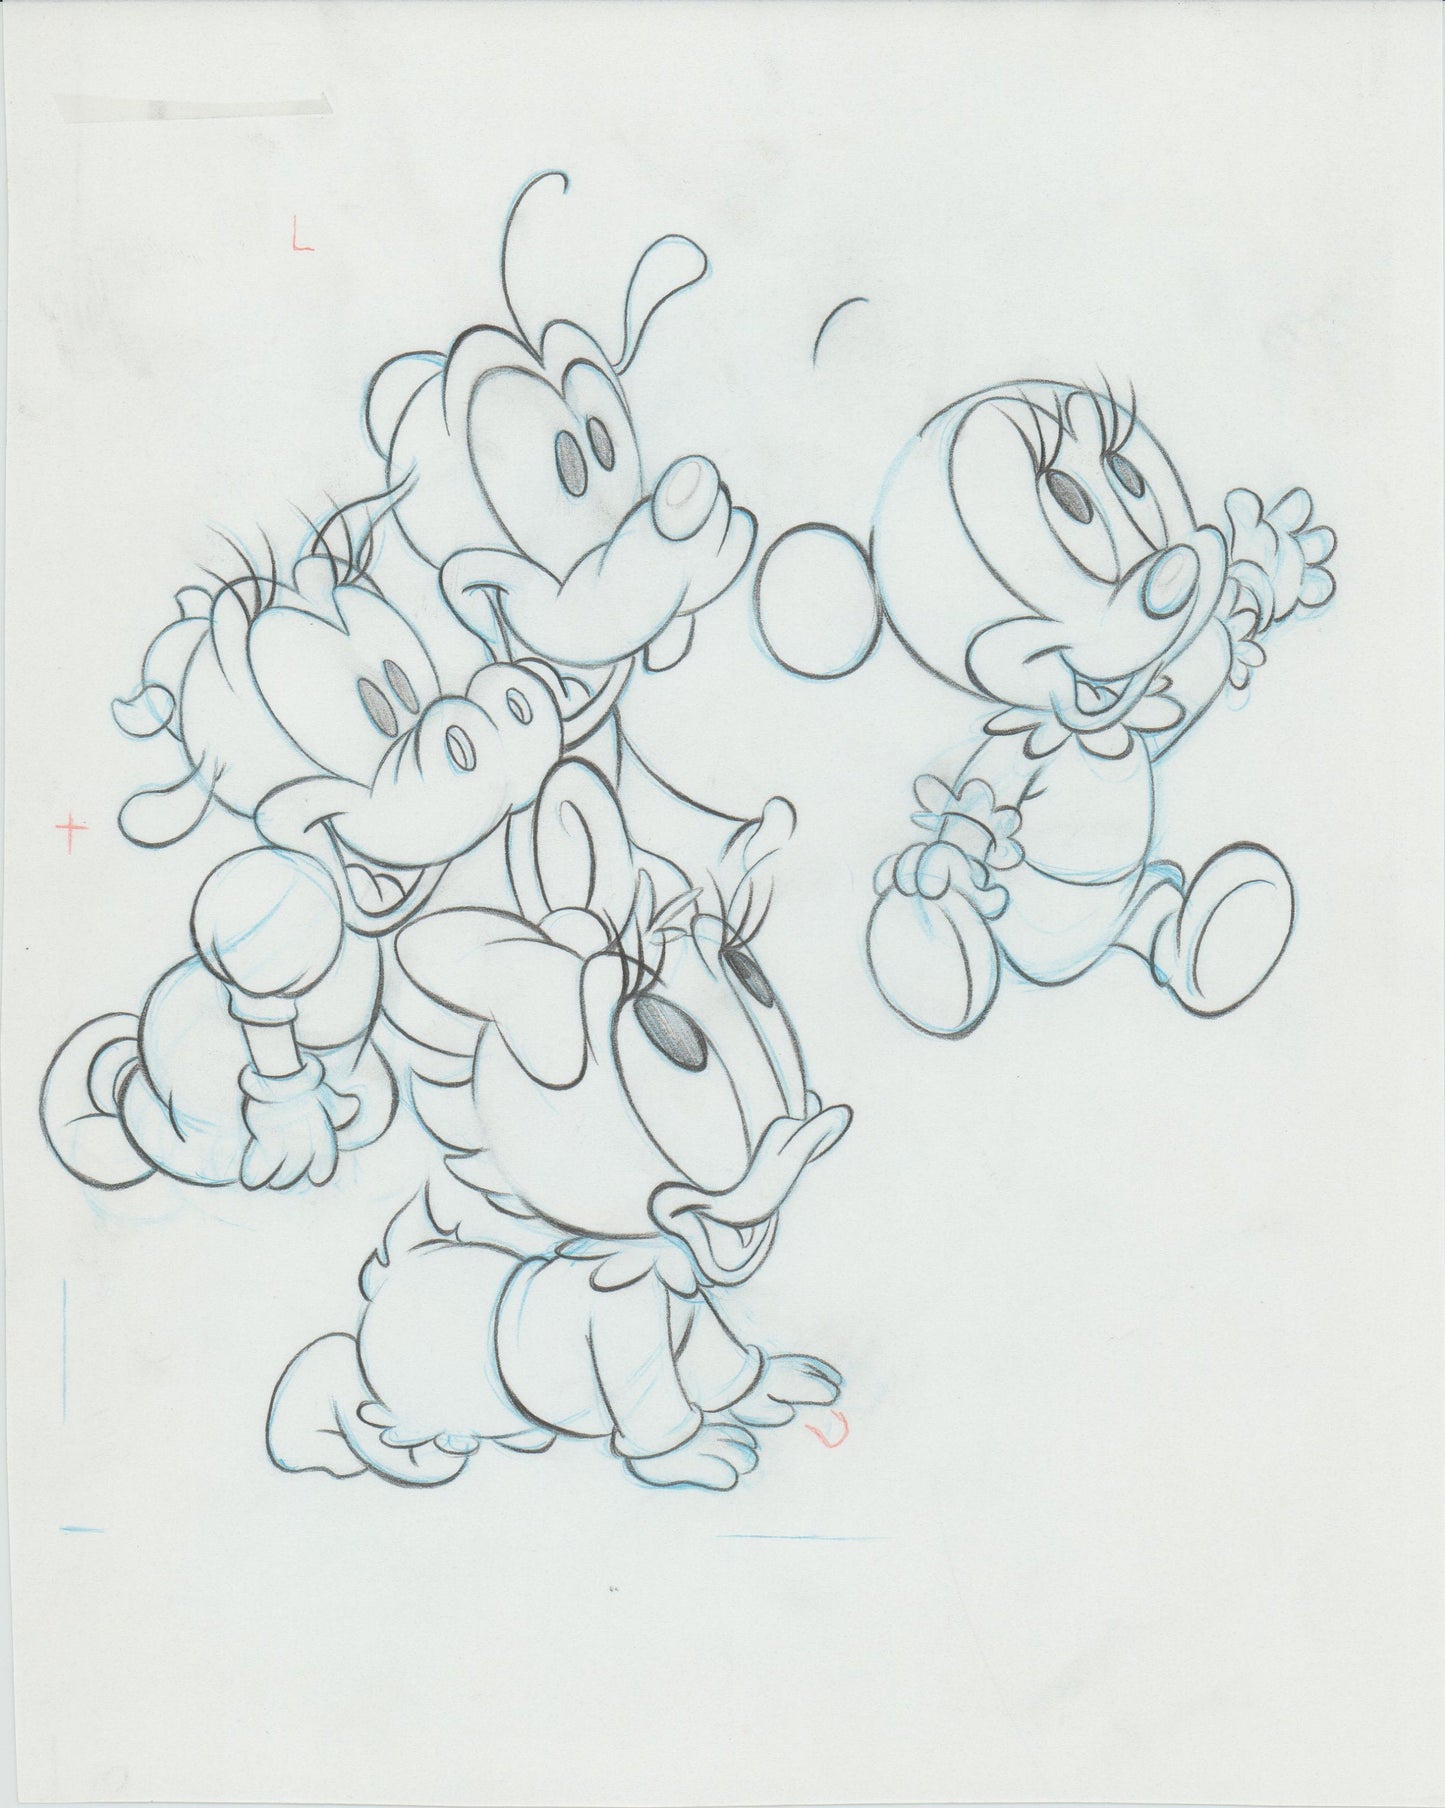 Walt Disney Babies Out And Around Show and Tell Book Page Illustration Drawing with Minnie Mouse Goofy and Daisy Duck from 1991 b7233